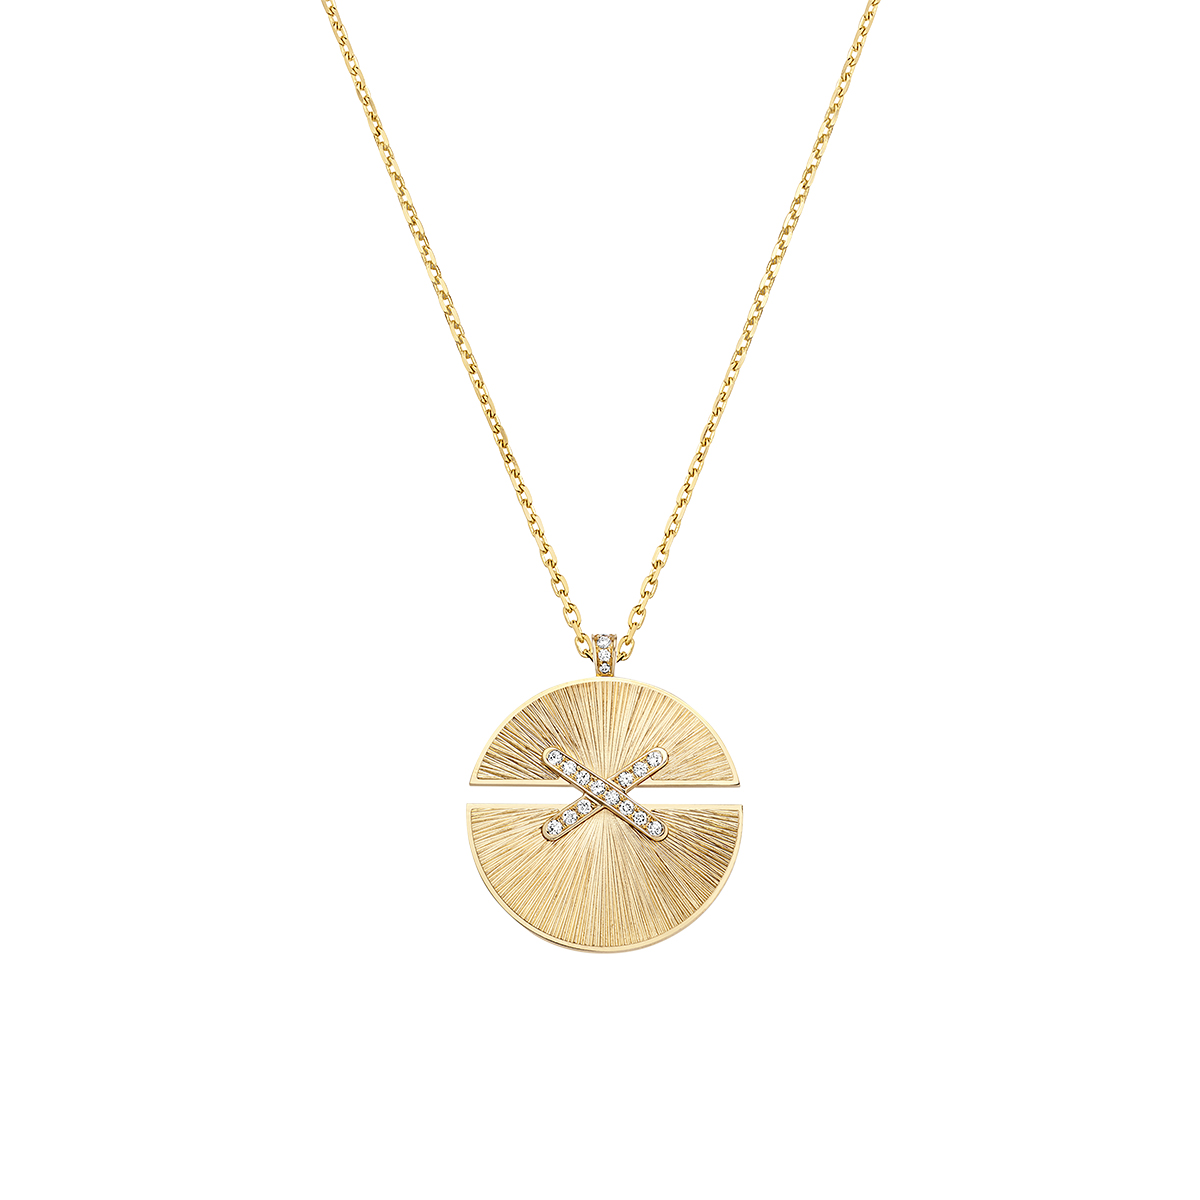 gold round pendant necklace